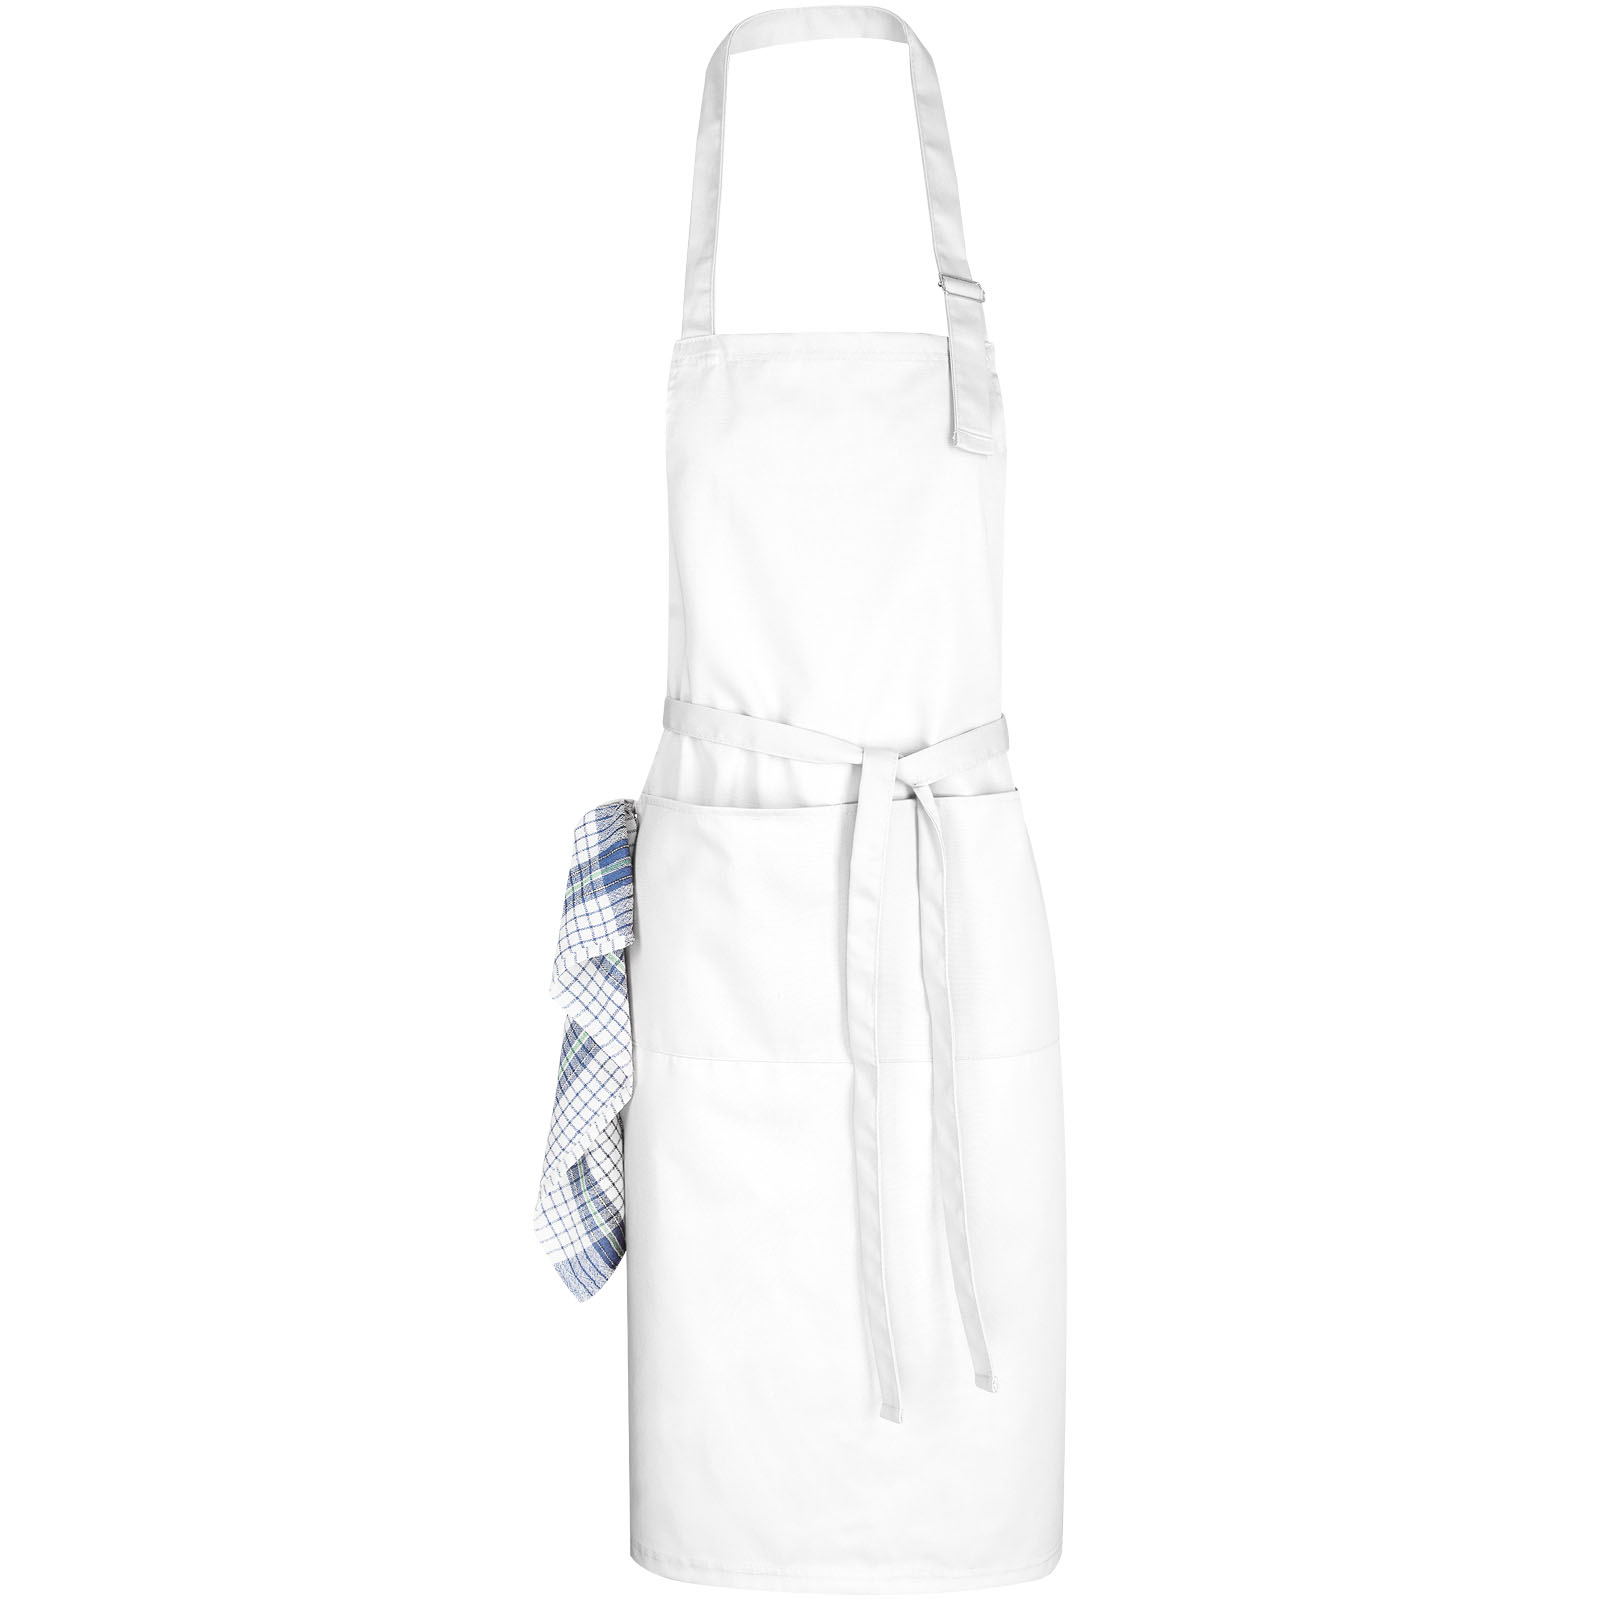 The Stain-Defender Apron - Hetton is a kitchen and cooking accessory specially designed to protect your clothing from spills and splashes. The apron features a protective layer that repels stains, ensuring your clothes remain clean and dry. Its design is sleek and professional, fitting comfortably to allow you to move freely while you cook. The 'Hetton' model boasts a high-quality, durable construction that can withstand frequent use. This apron is the perfect tool for any whimsical or serious chef to keep their clothes pristine during meal prep. - Scarborough